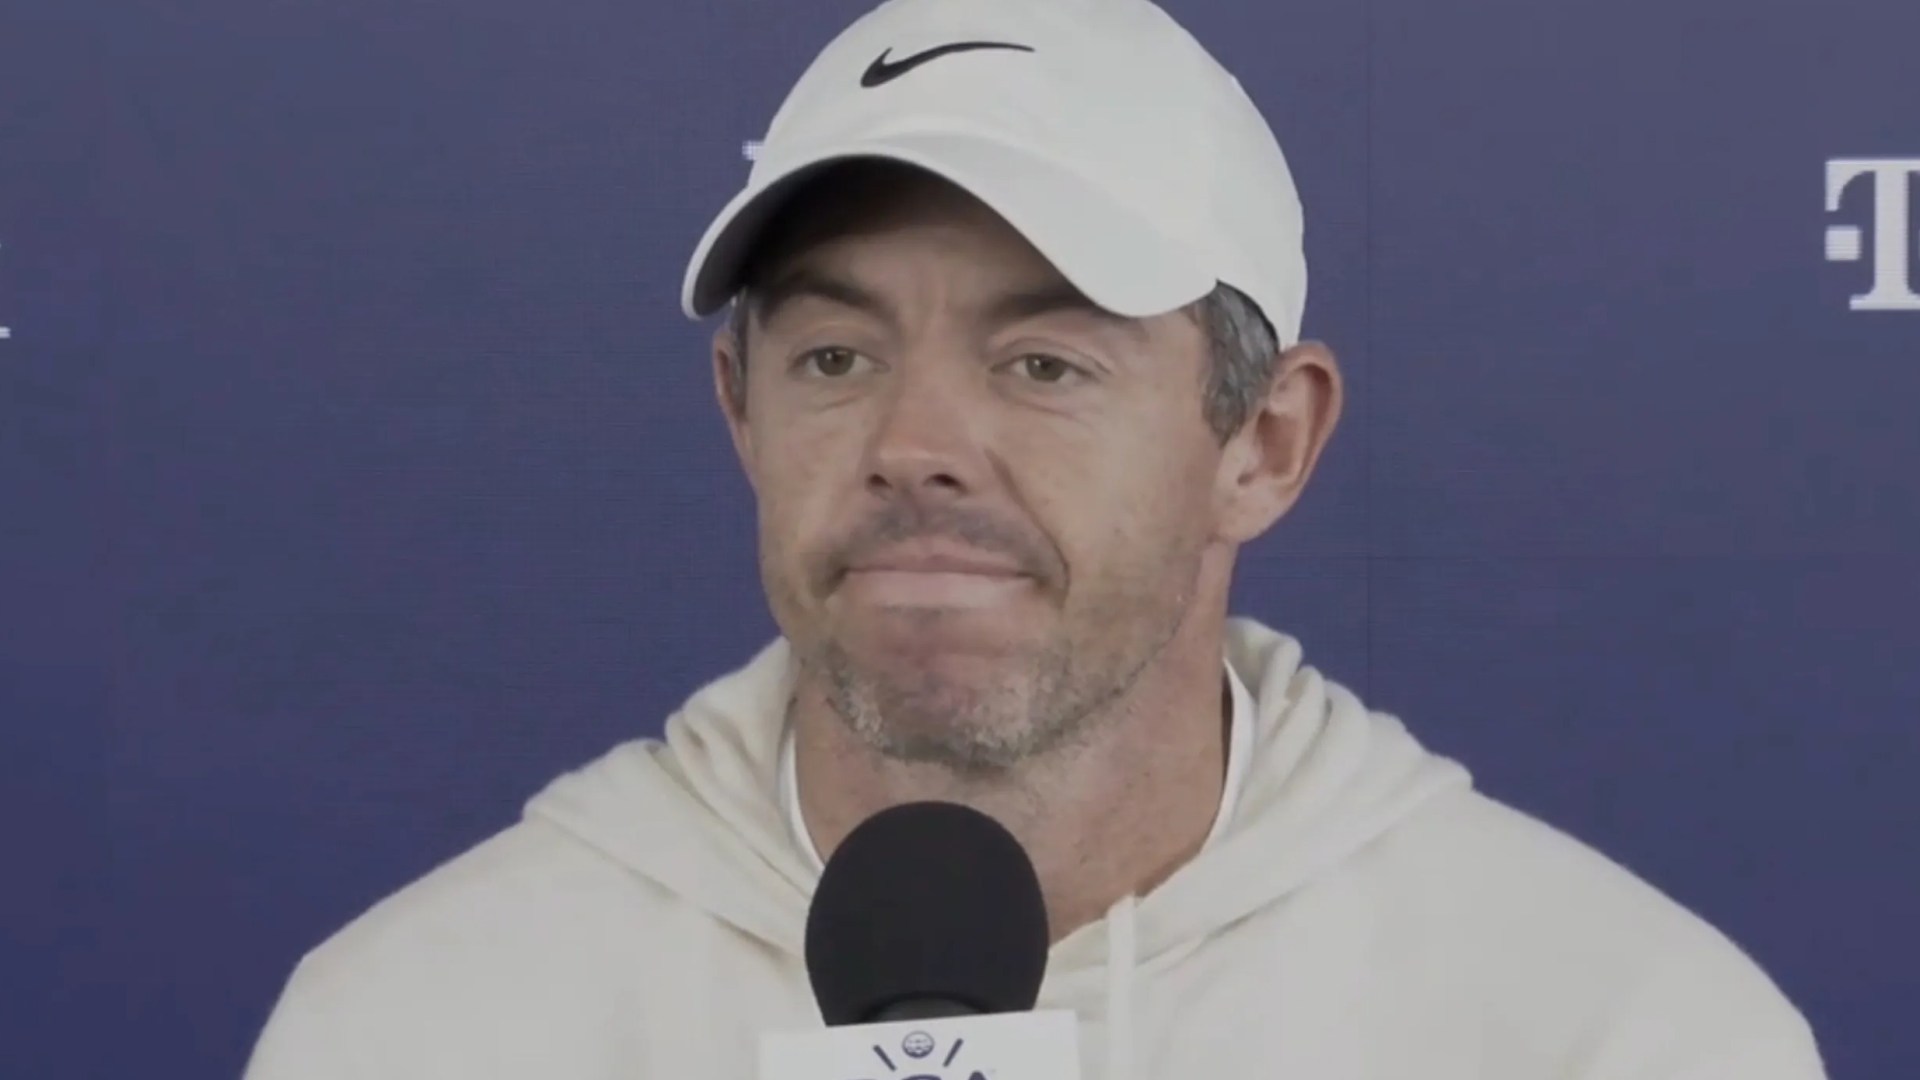 Rory McIlroy breaks silence after filing for divorce from wife as he hold press conference on eve USPGA Championship [Video]